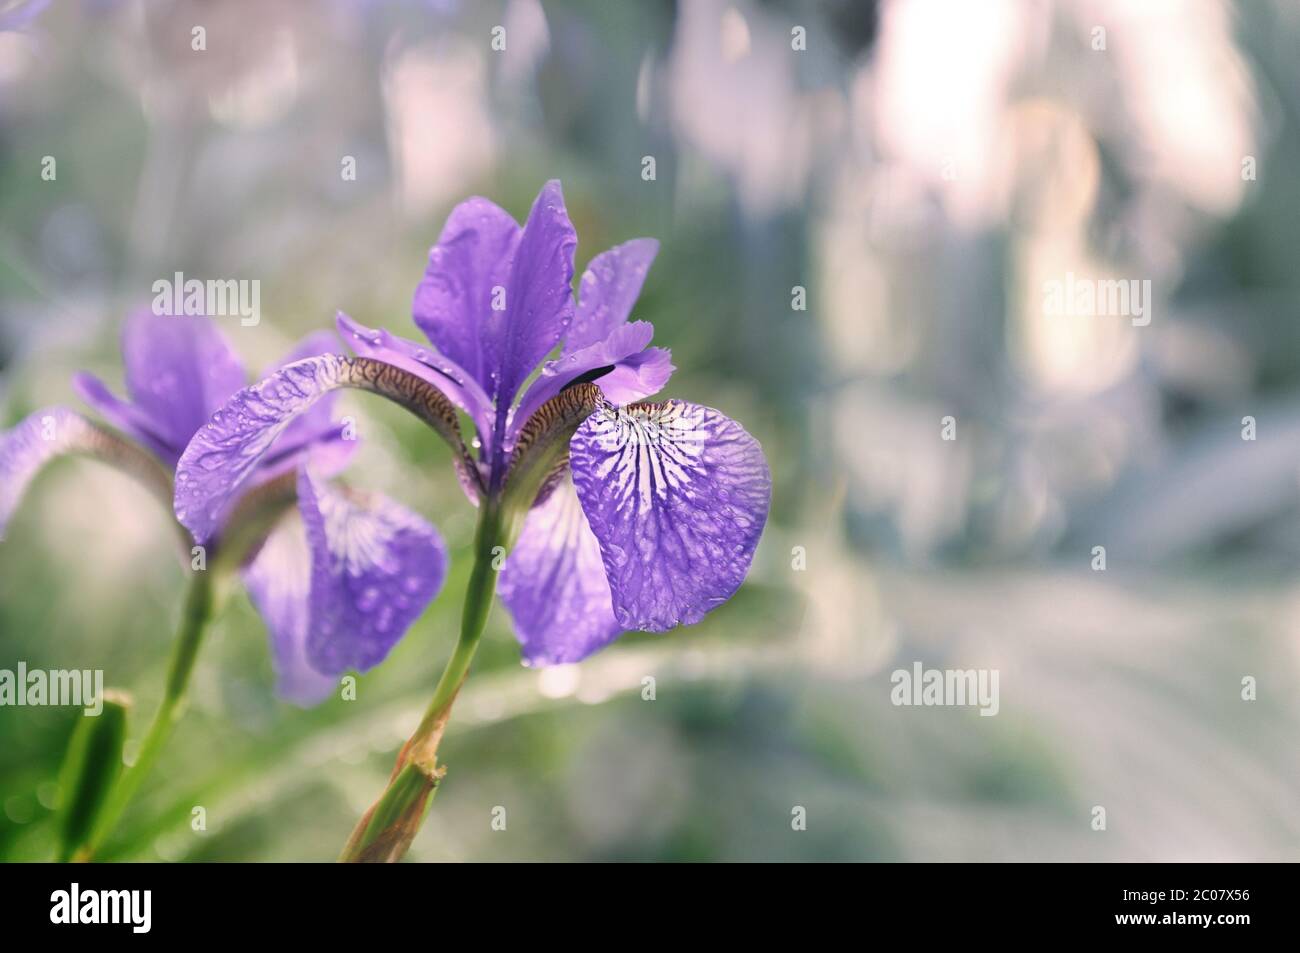 Wet blue Íris flower on blurred background of nature Stock Photo